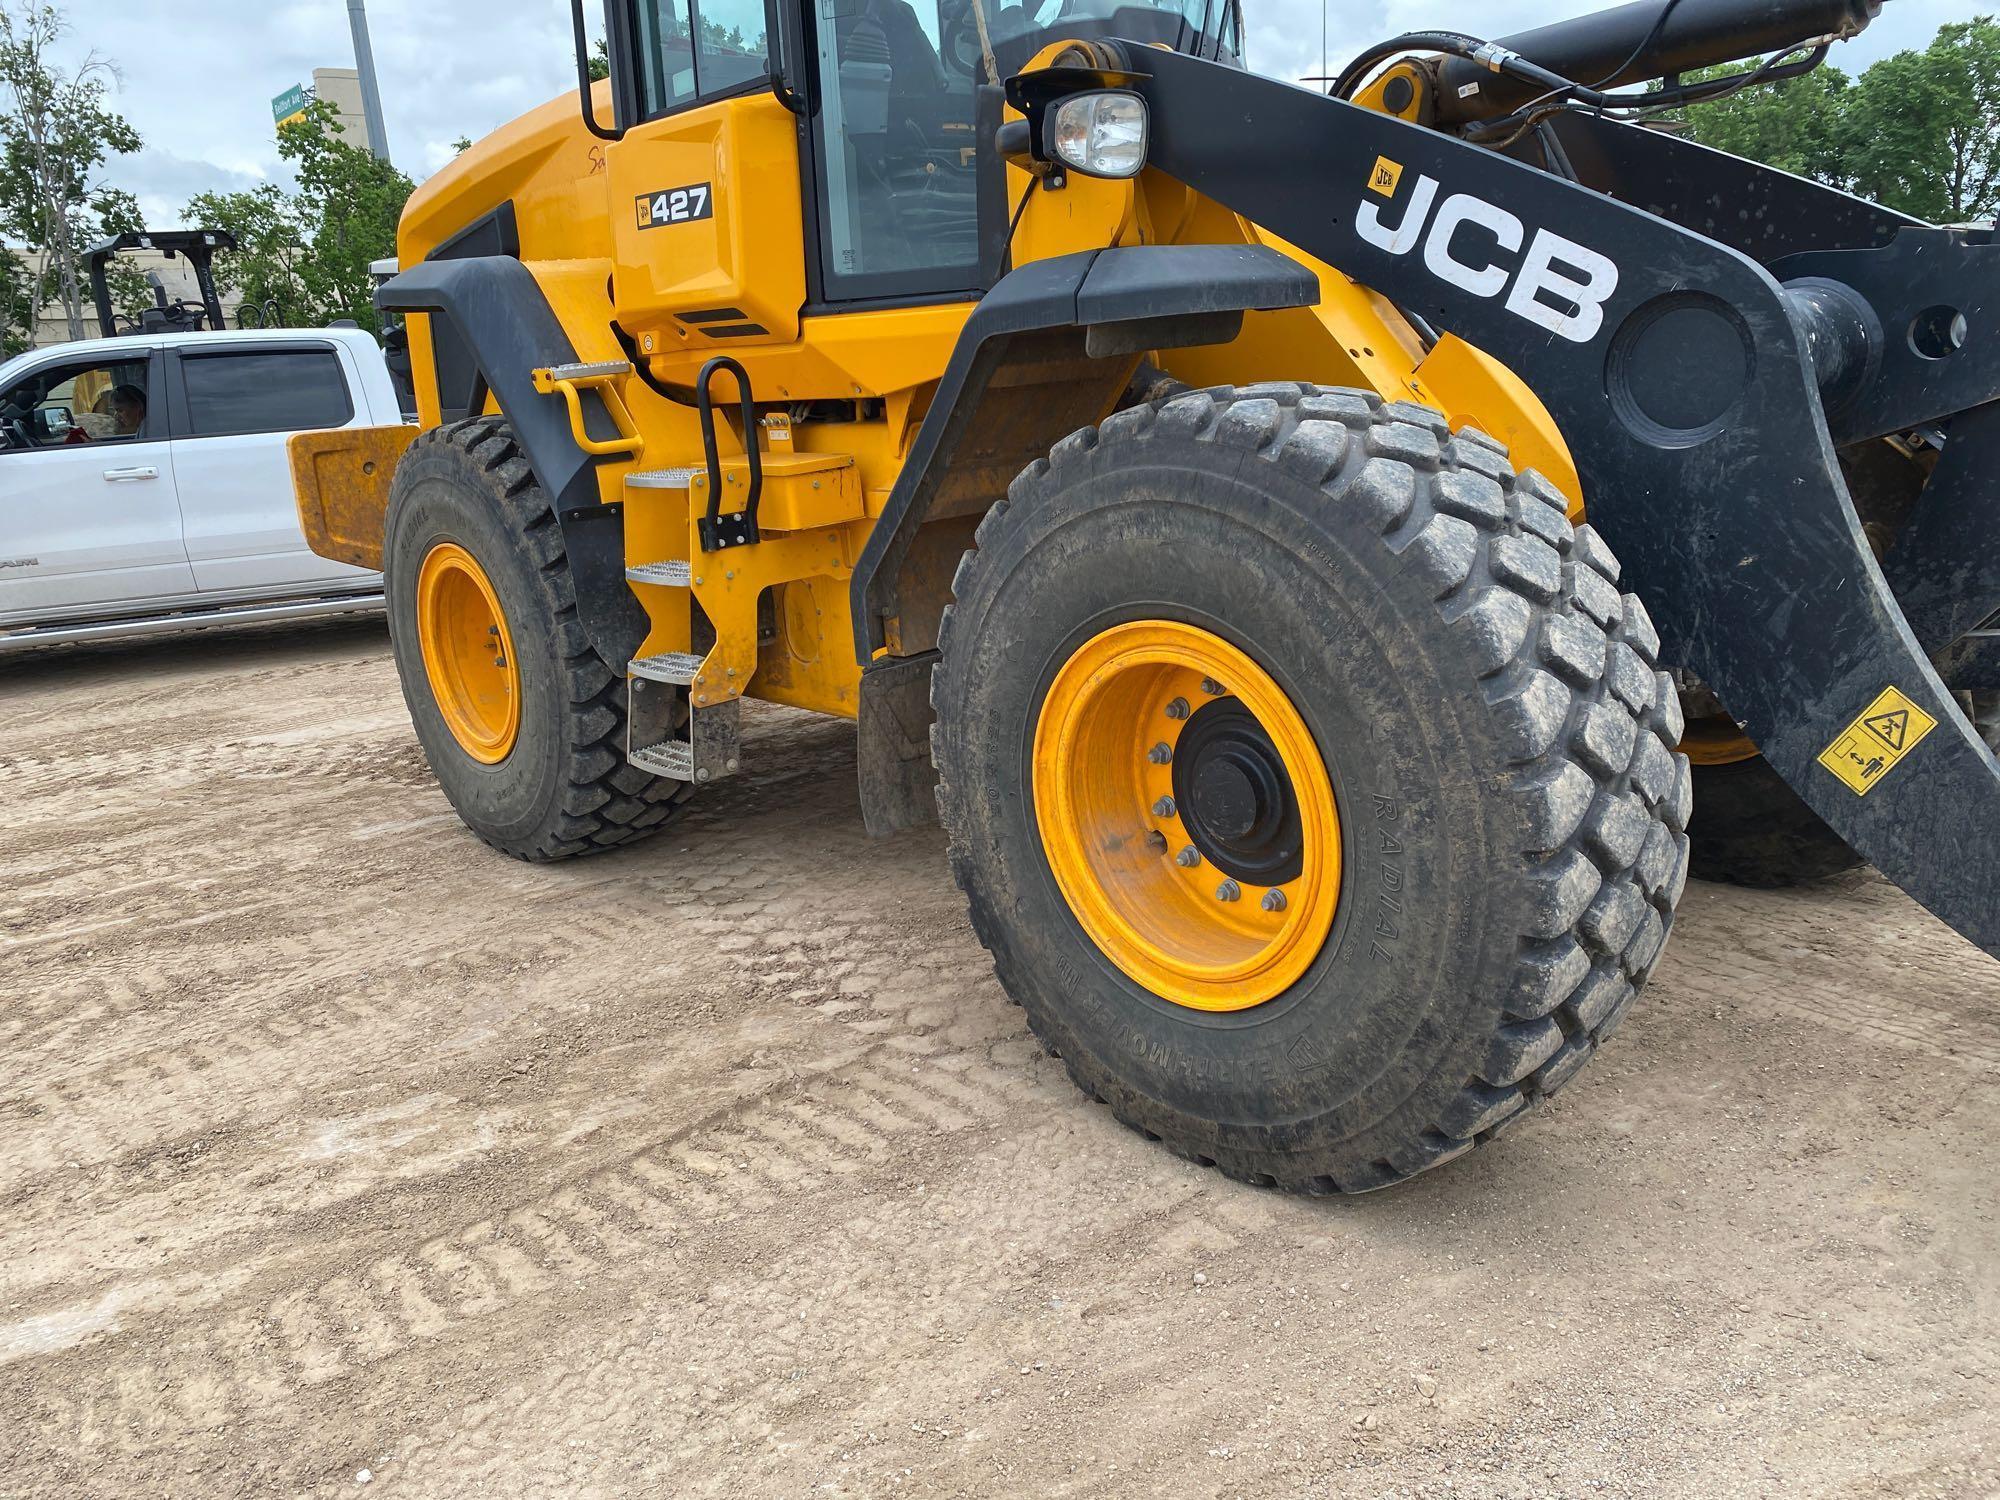 2022 JCB 427ZX RUBBER TIRED LOADER SN:3079281 powered by 6.7 liter diesel engine, equipped with